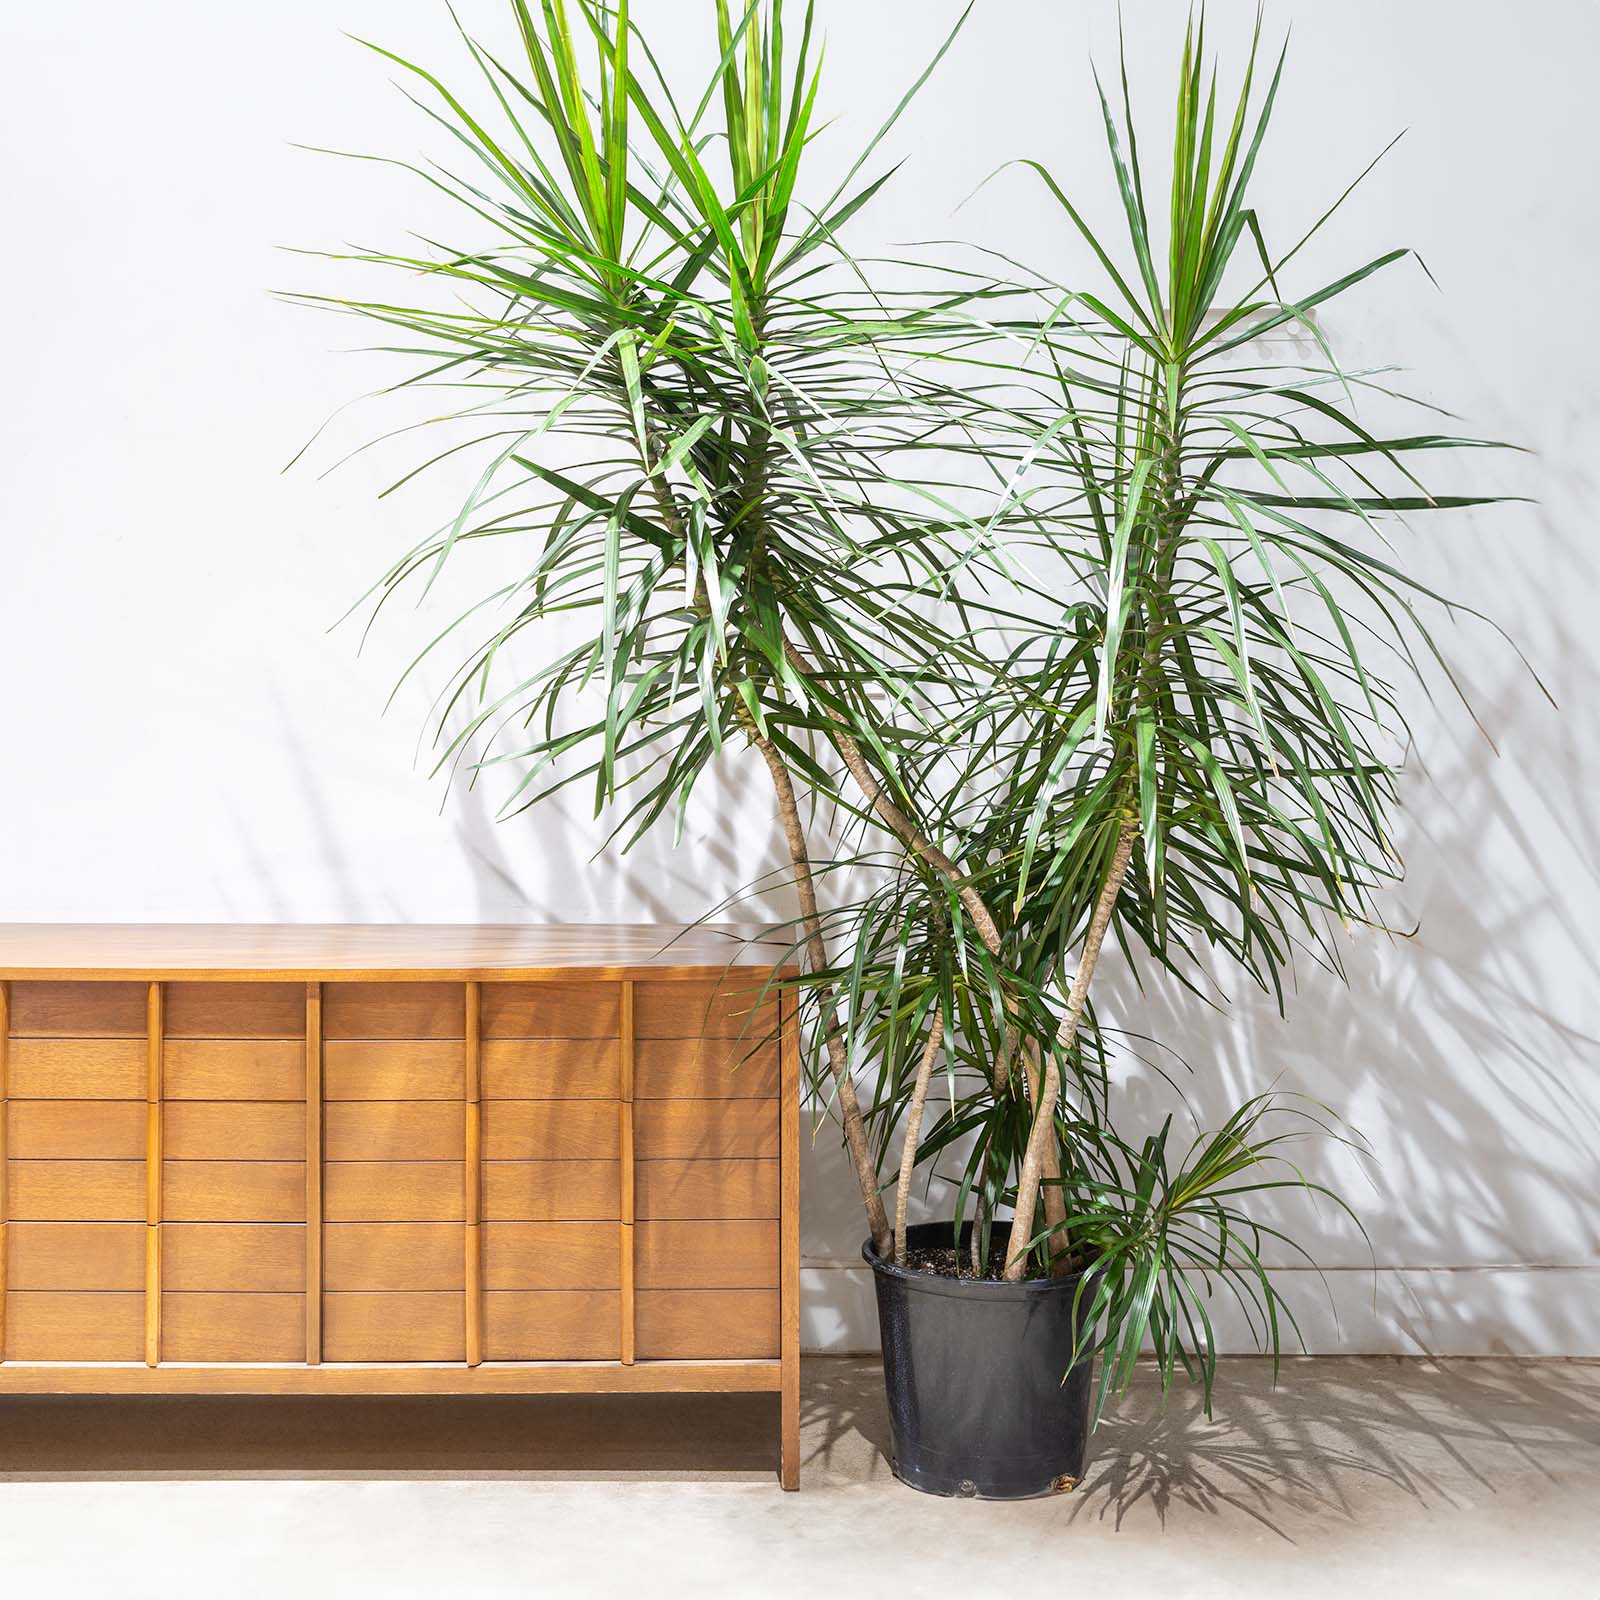 Dracaena Marginata Staggered | Care Guide and Pro Tips - Delivery from Toronto across Canada - JOMO Studio